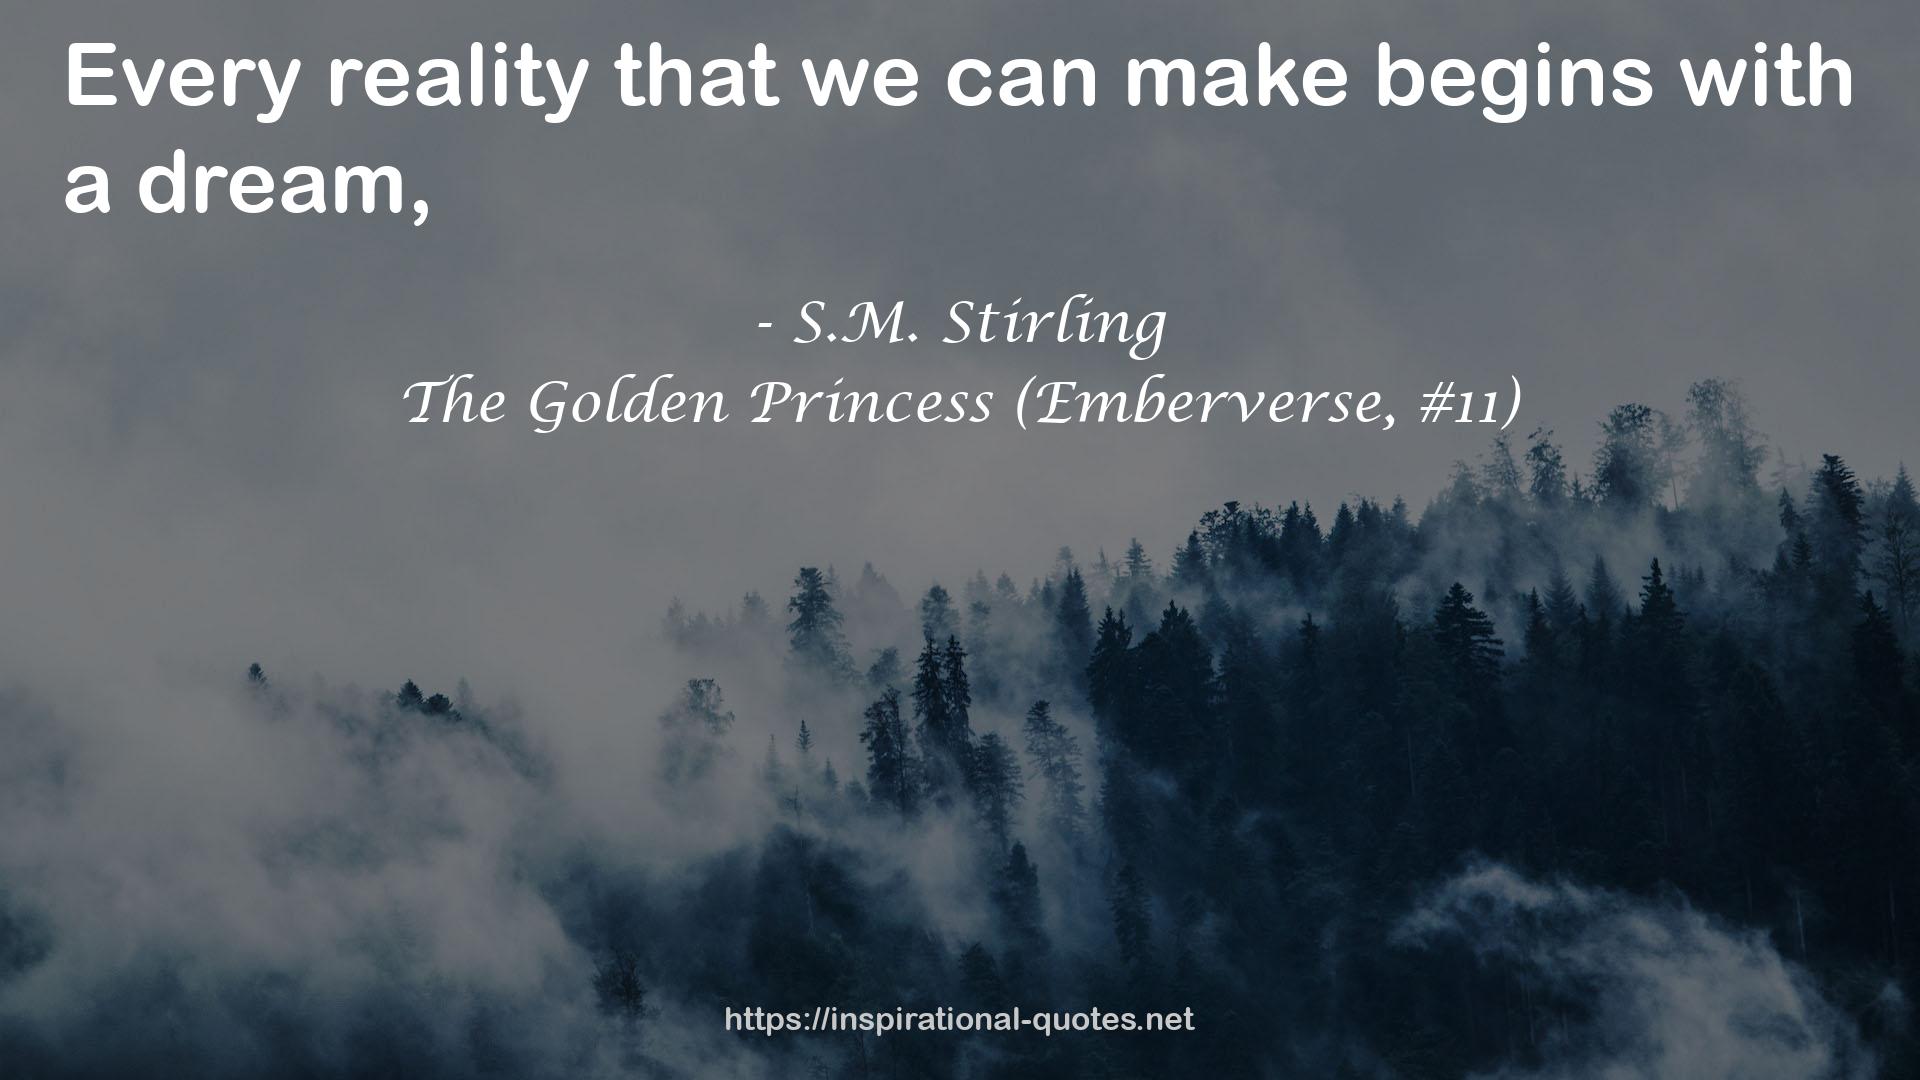 S.M. Stirling QUOTES